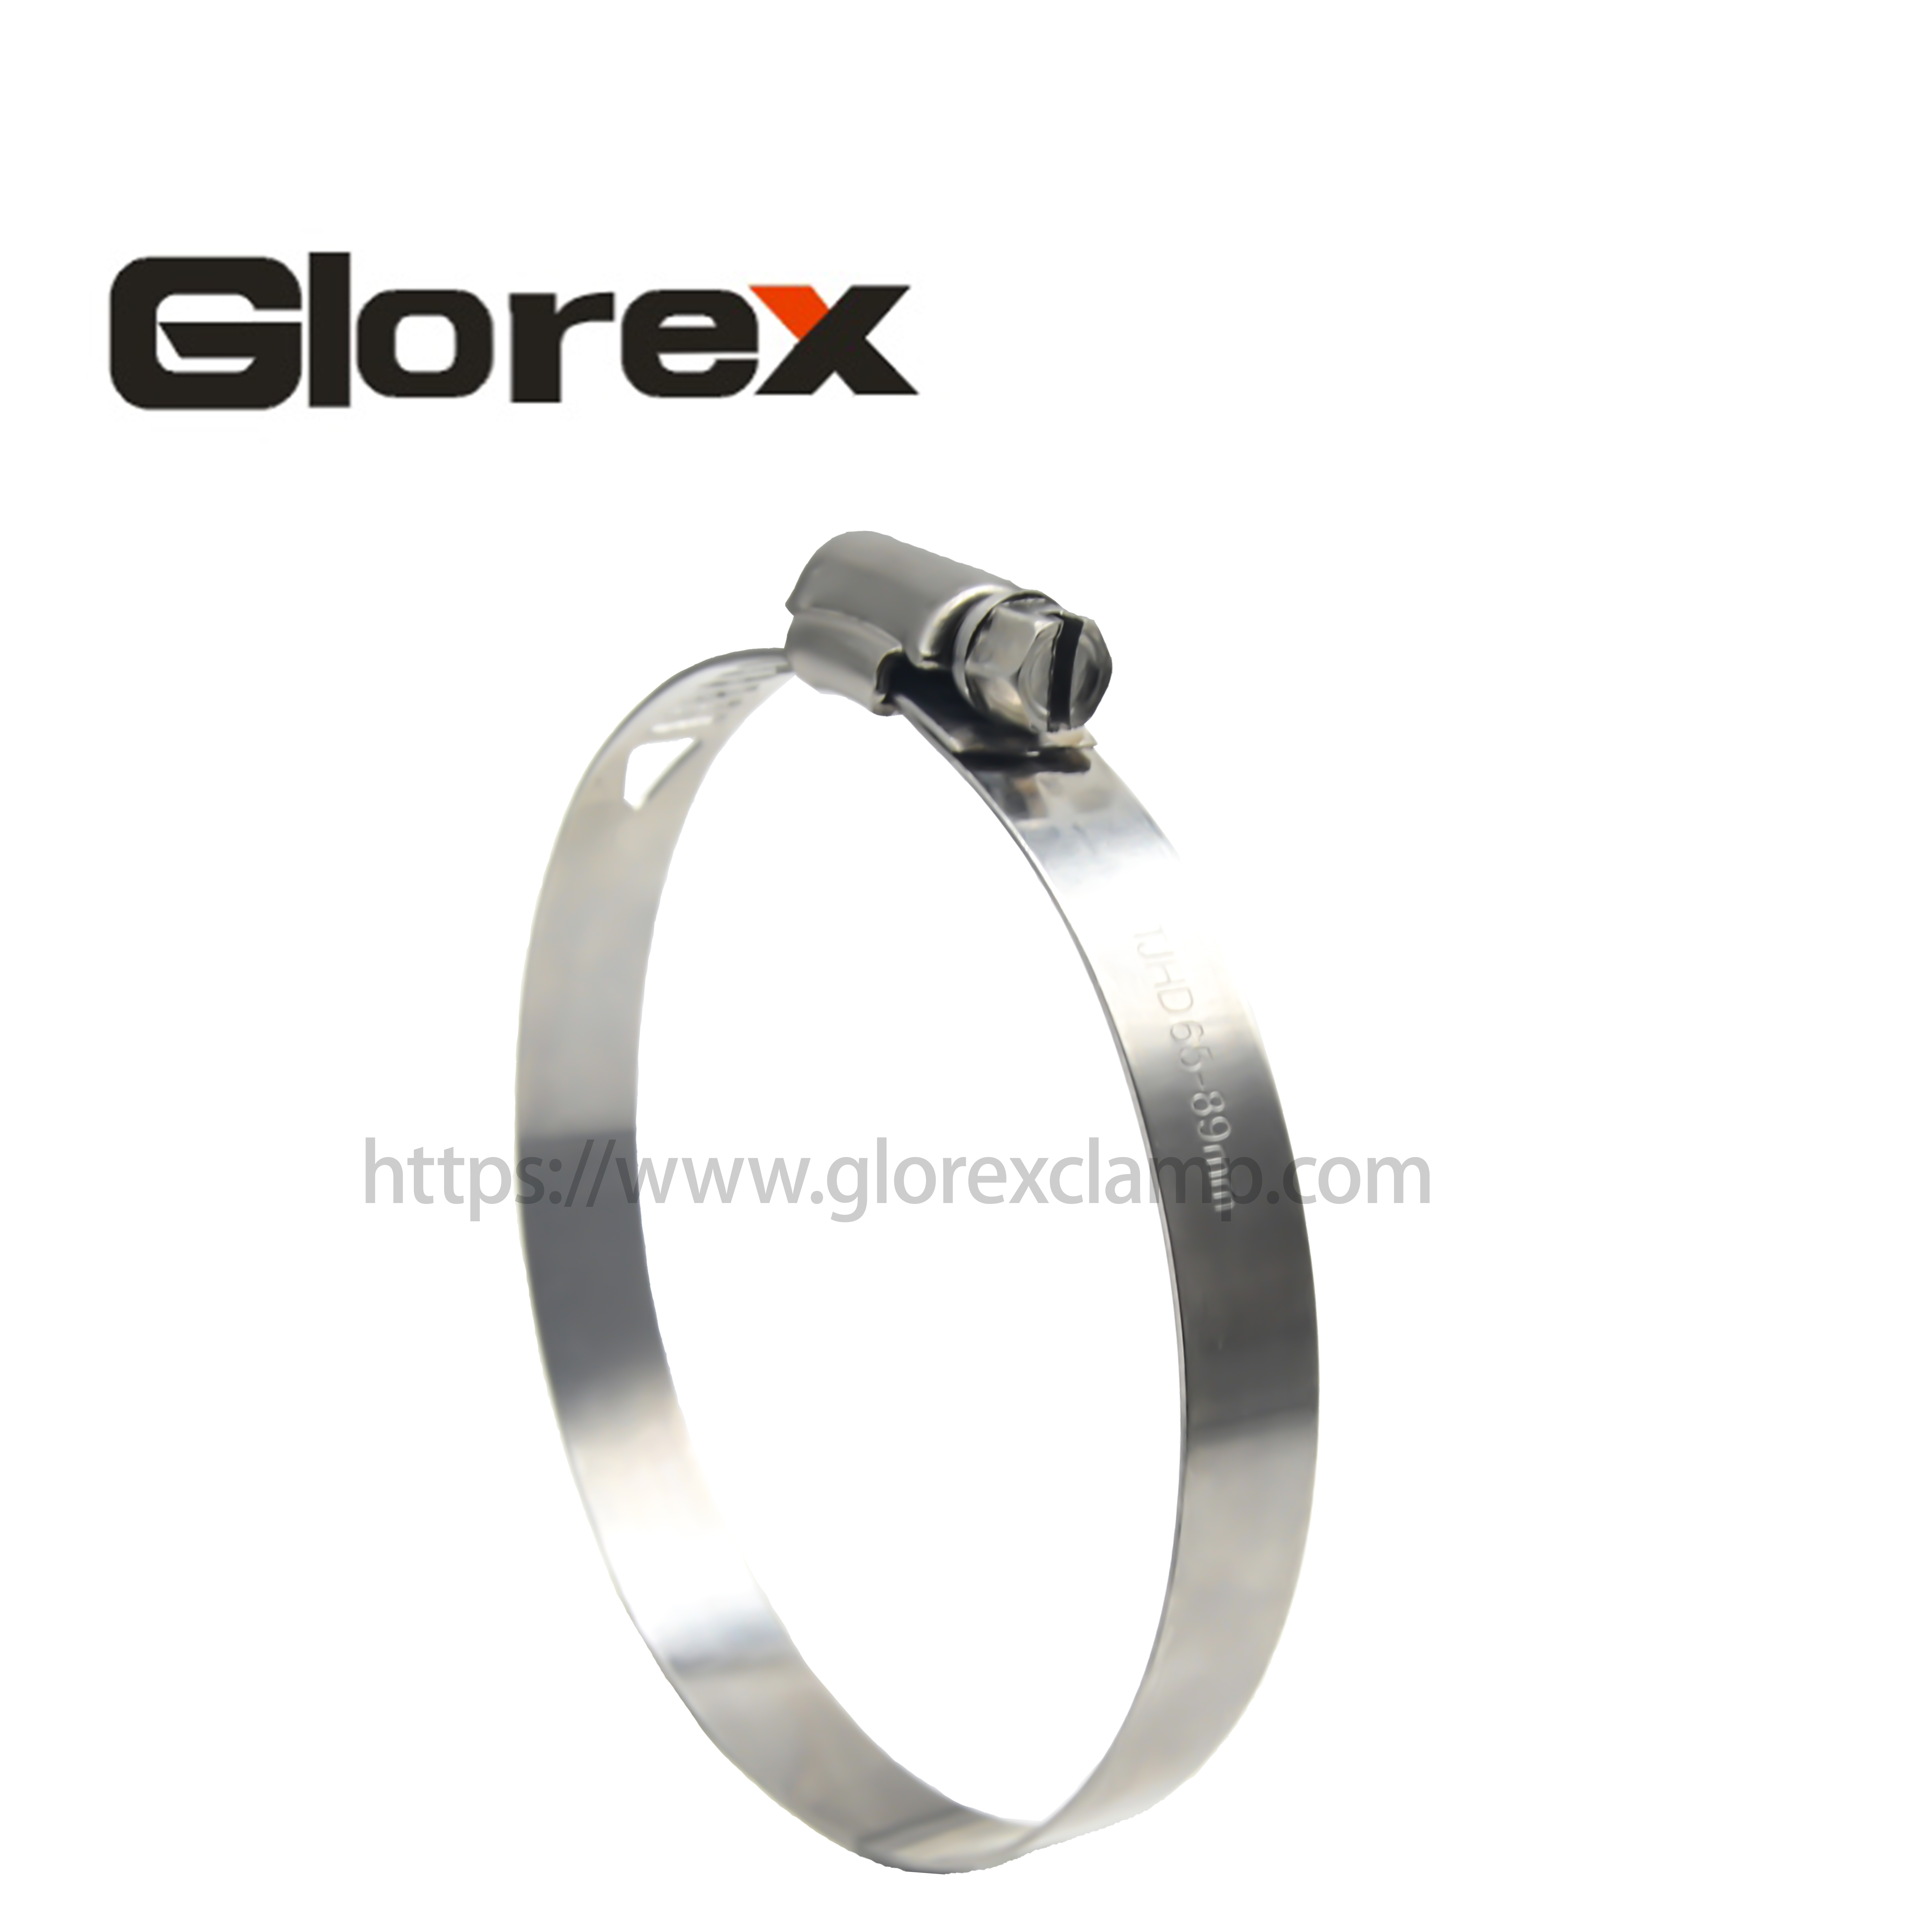 OEM Factory for Hose Clamp 2 Inch - 10mm American type hose clmp – Glorex